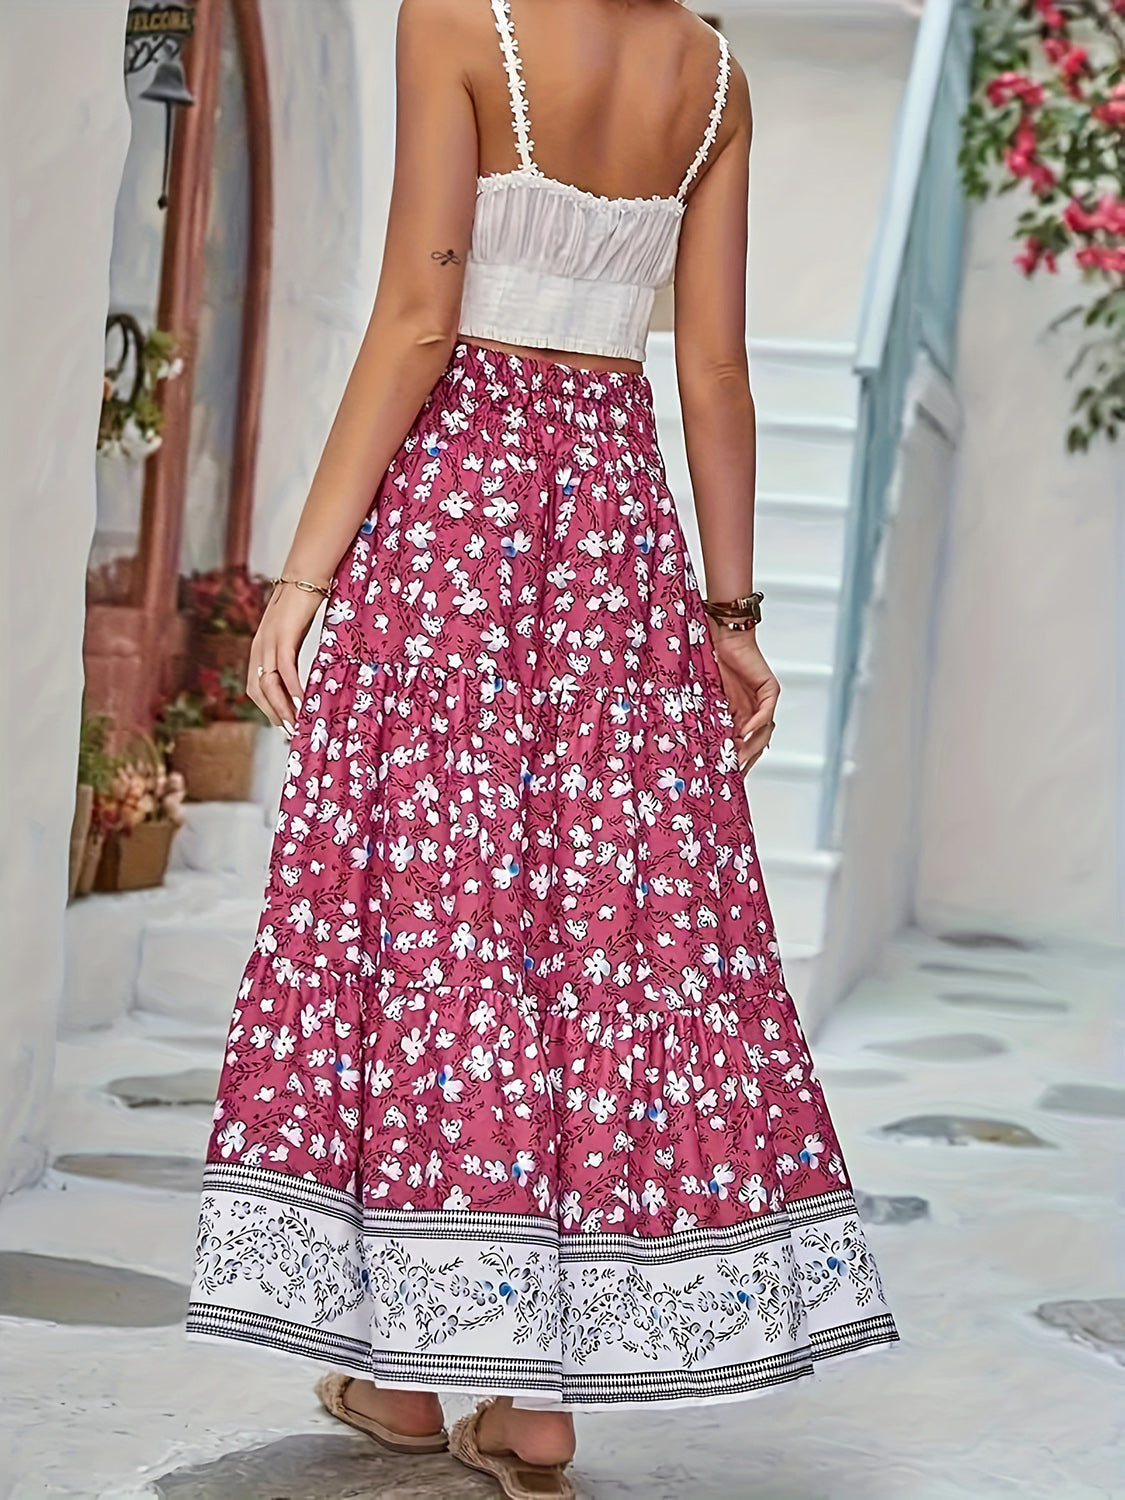 Red boho skirt with intricate floral pattern